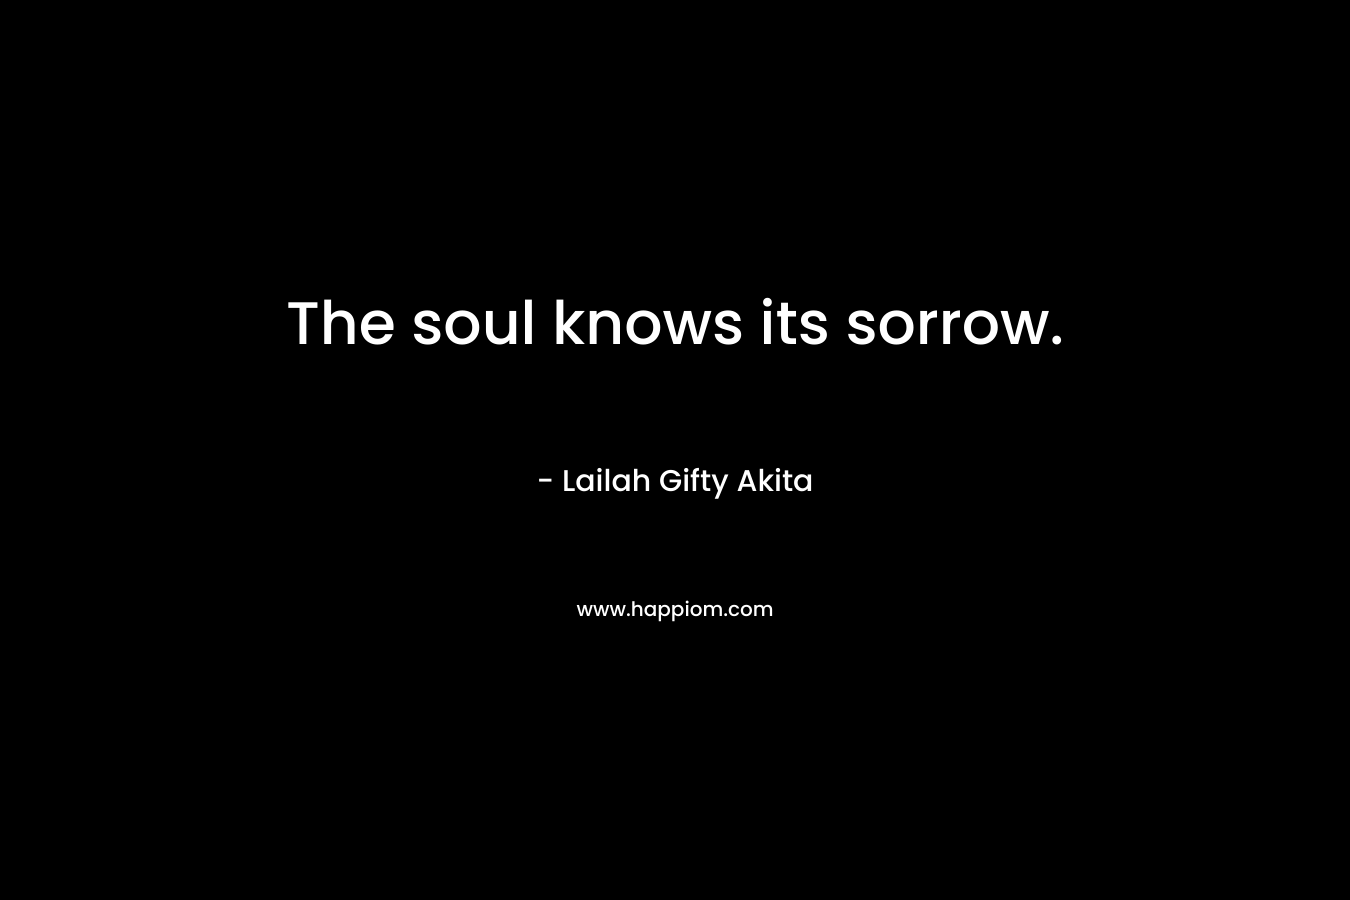 The soul knows its sorrow.